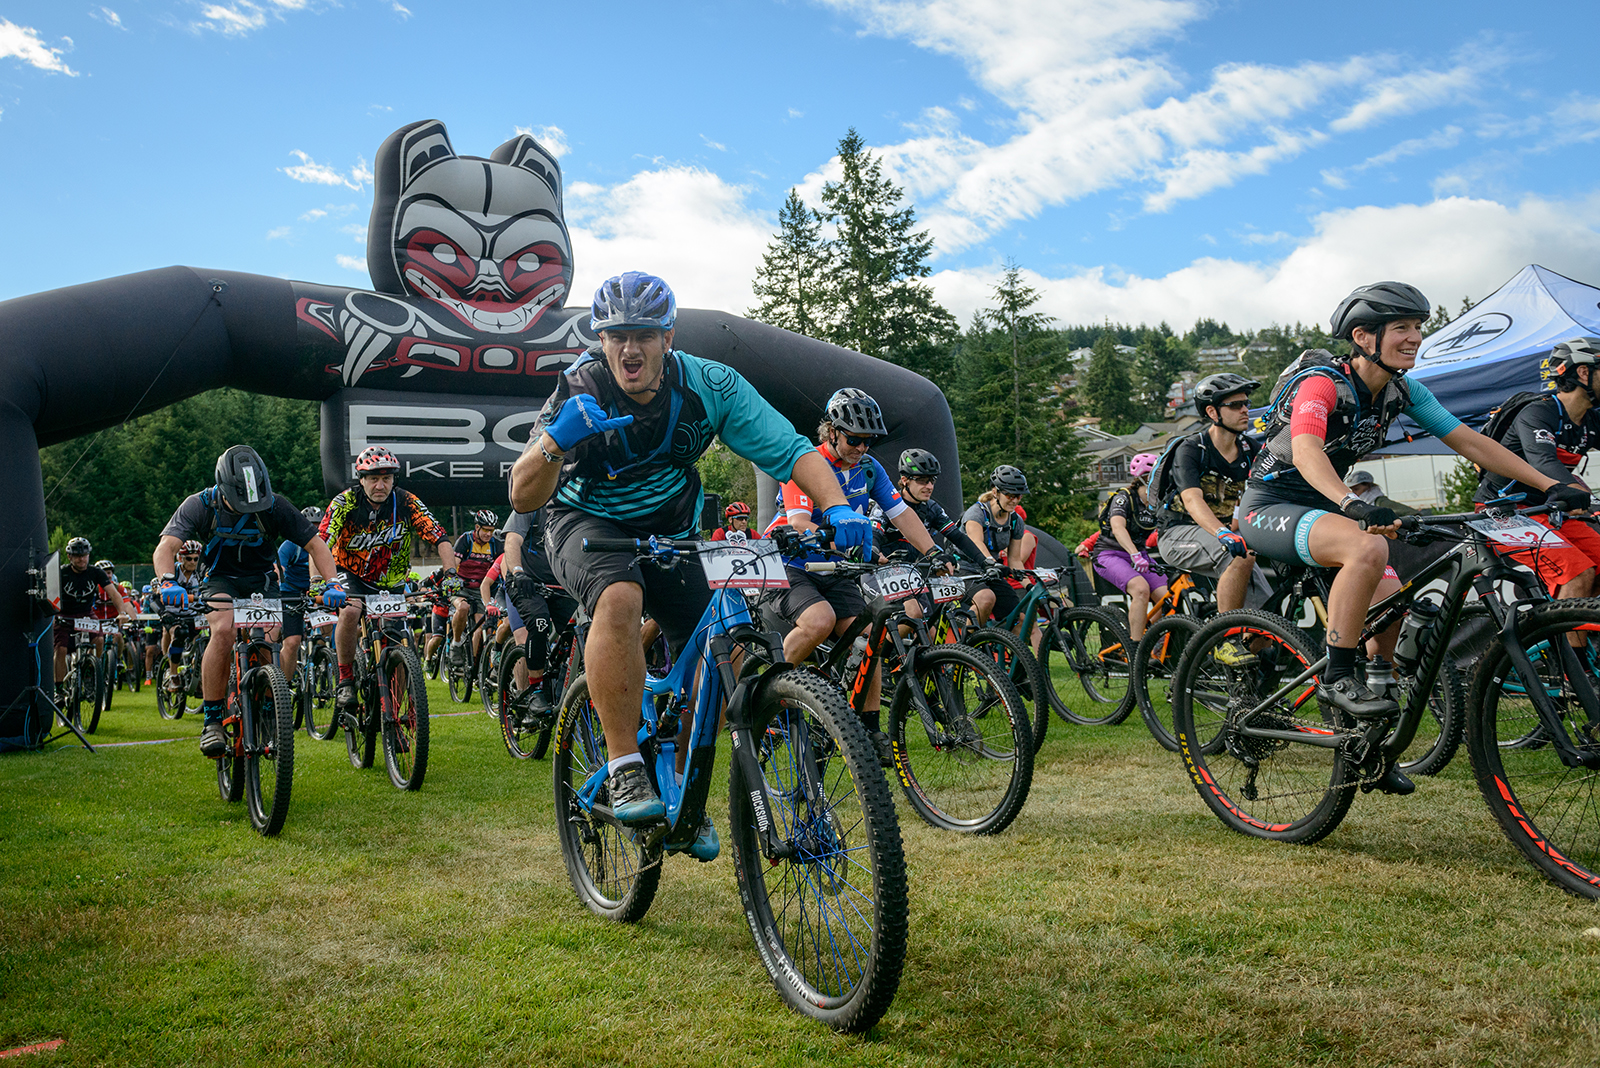 The 2019 BC Bike Race is Sold Out